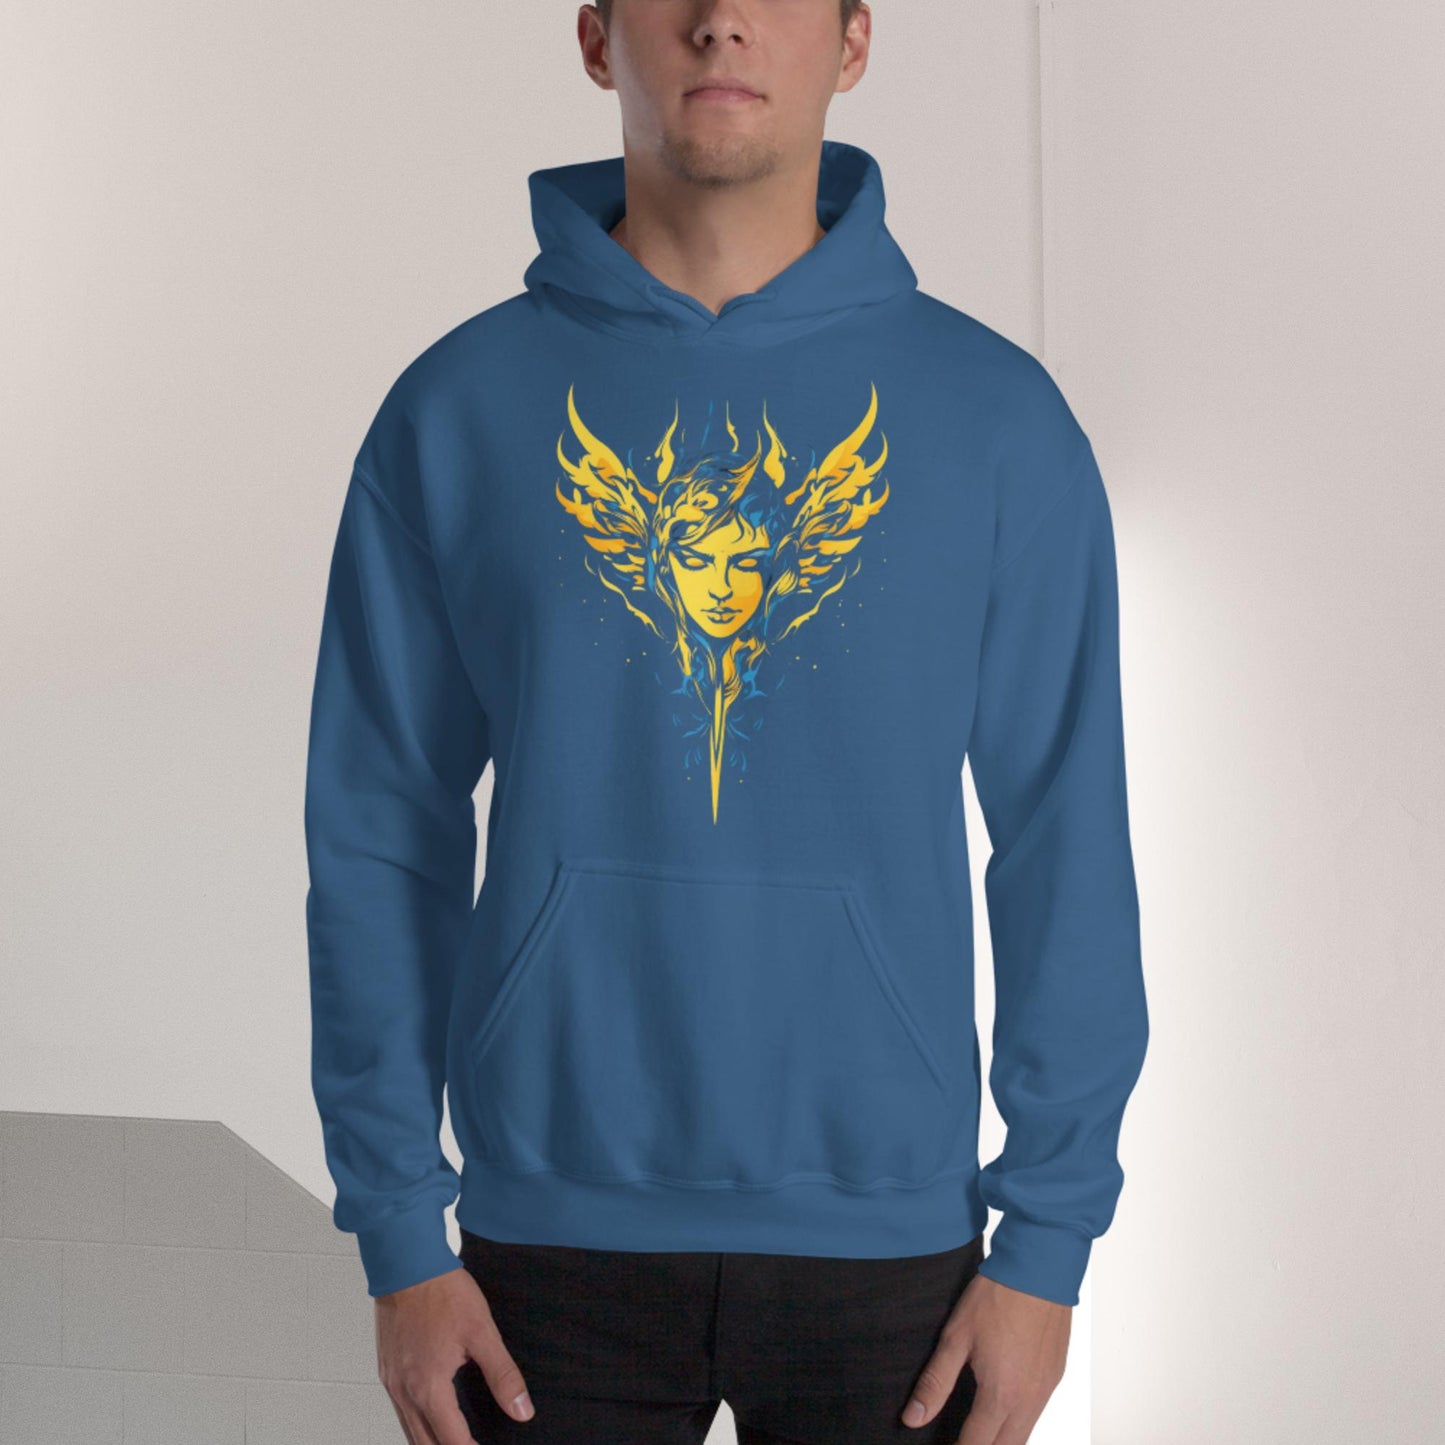 Tranquility 1 Unisex Hoodie